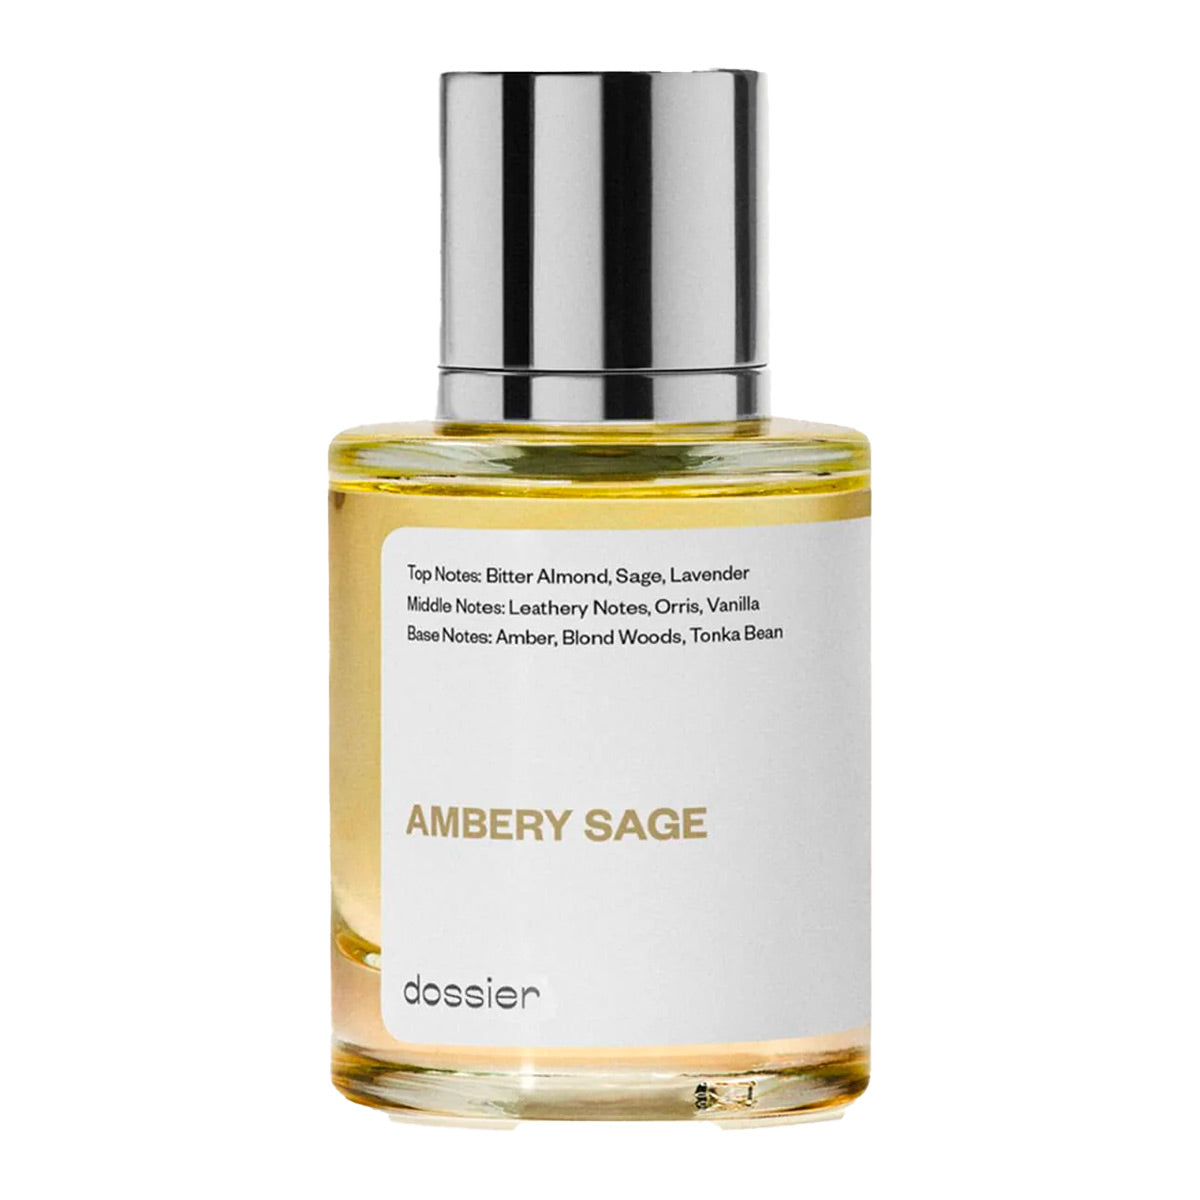 Dossier Ambery Sage Eau de Parfum Inspired by Tom Ford's Fucking Fabulous 50 ml